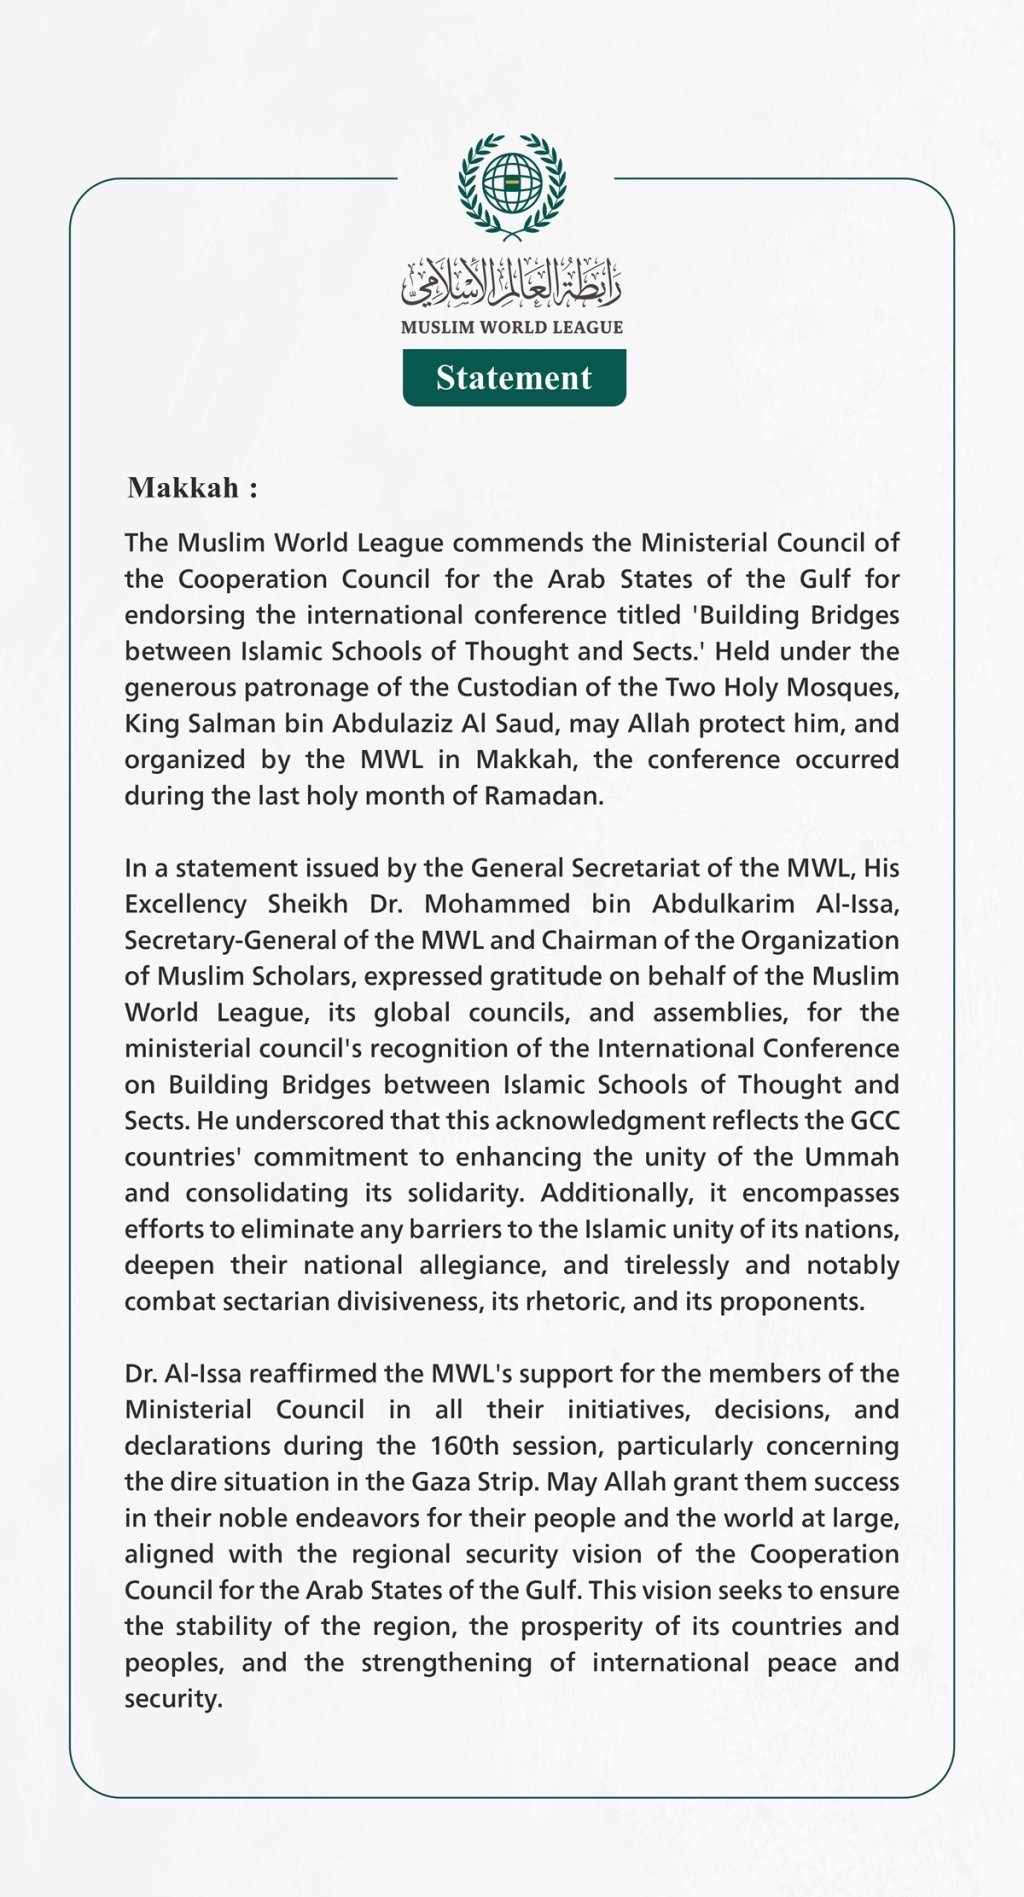 The Muslim World League appreciates the GCC Ministerial Council's welcoming of the contents of the conference on Building Bridges between Islamic Schools of Thought and Sects.